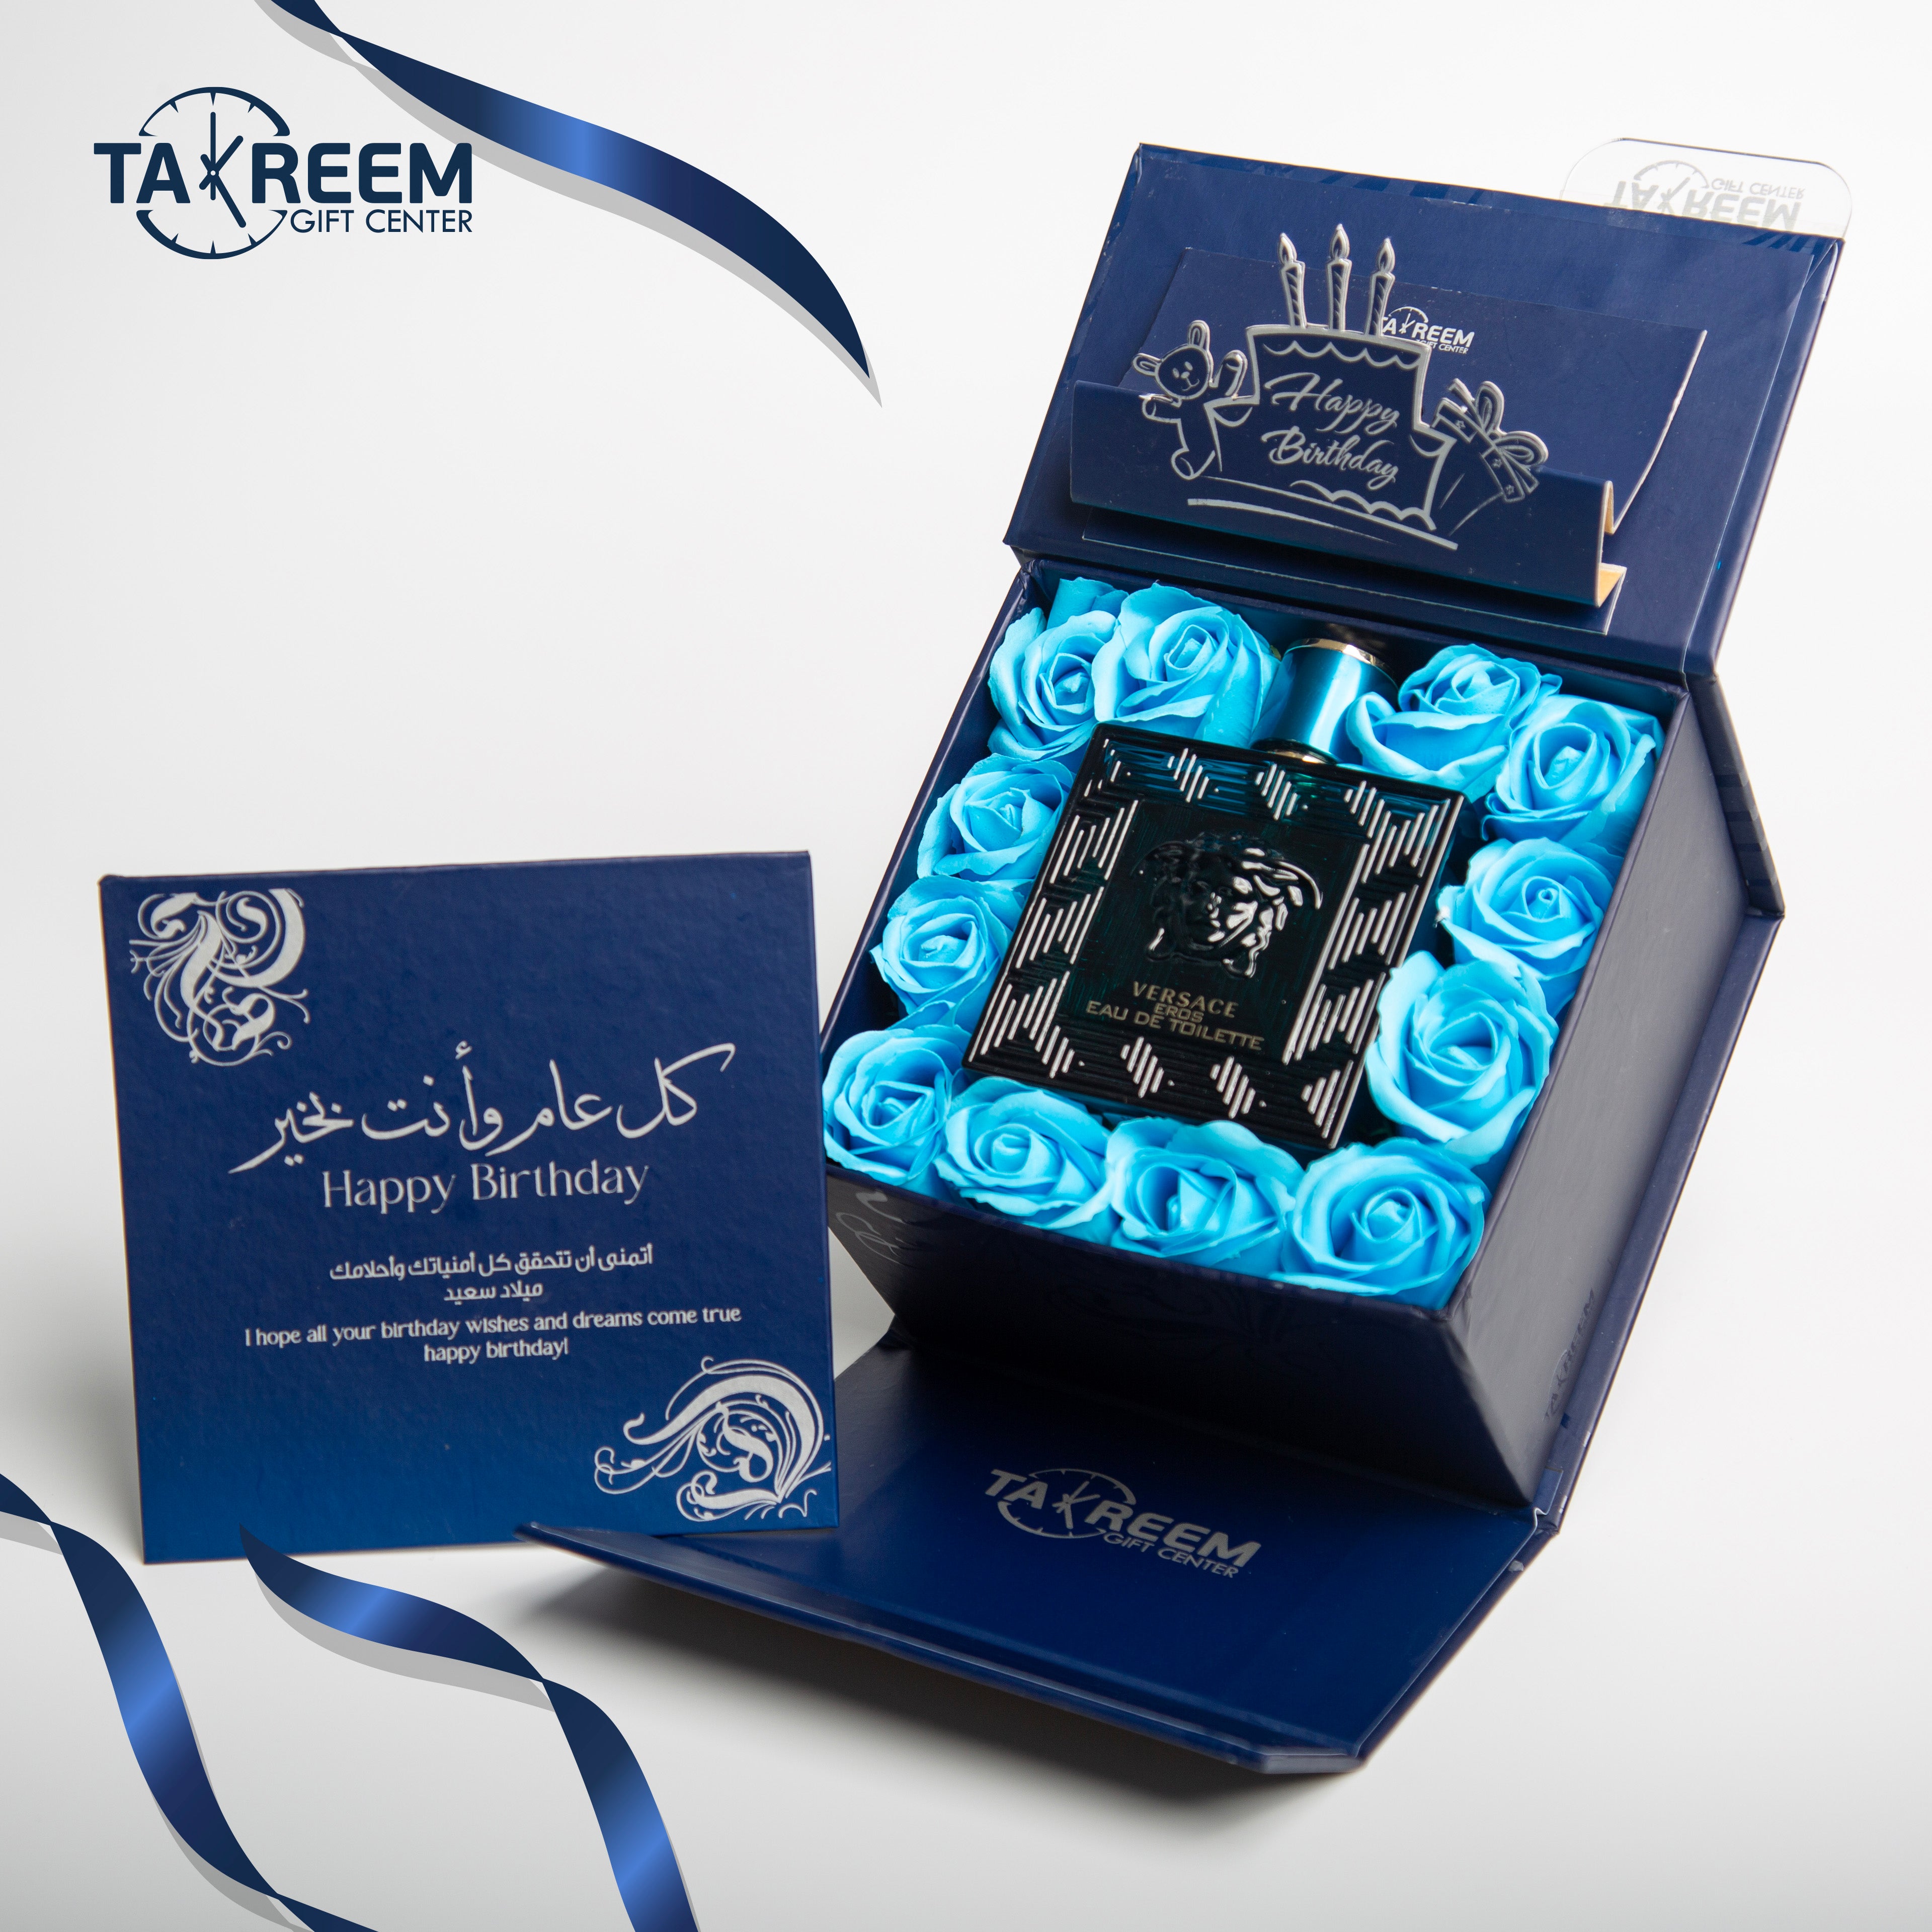 Small Smile7 Gift Boxes  By Takreem Gifts Center